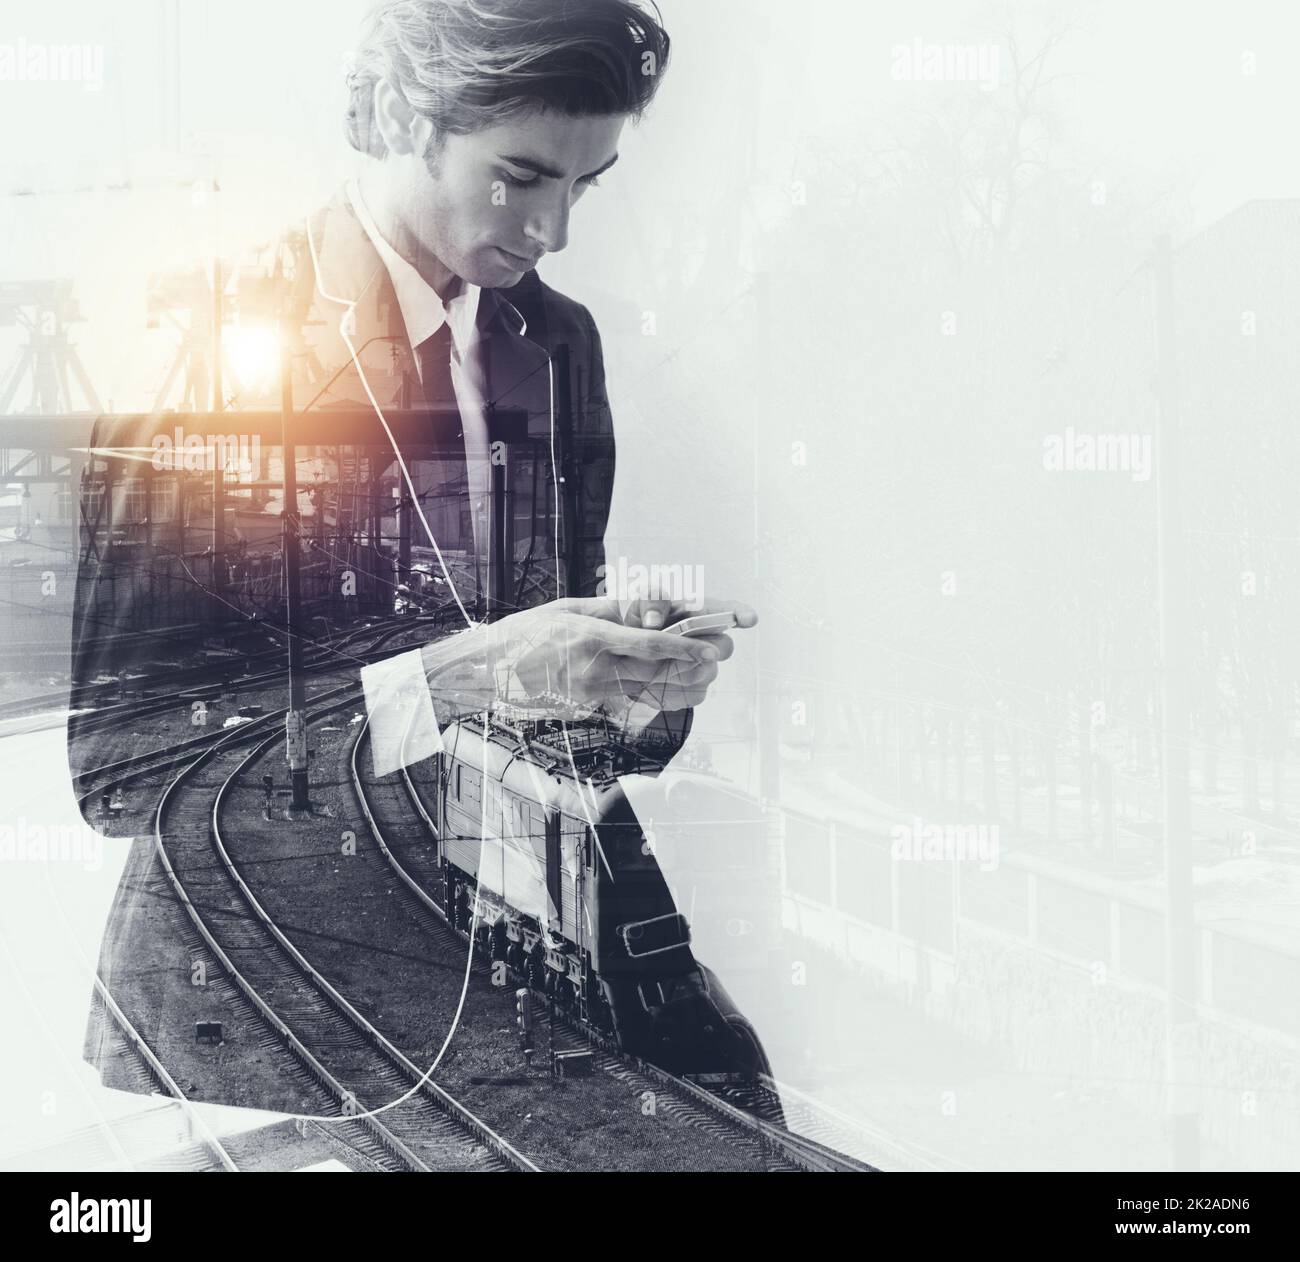 He has all the right connections. Multiple exposure shot of a business man superimposed over a traintrack. Stock Photo